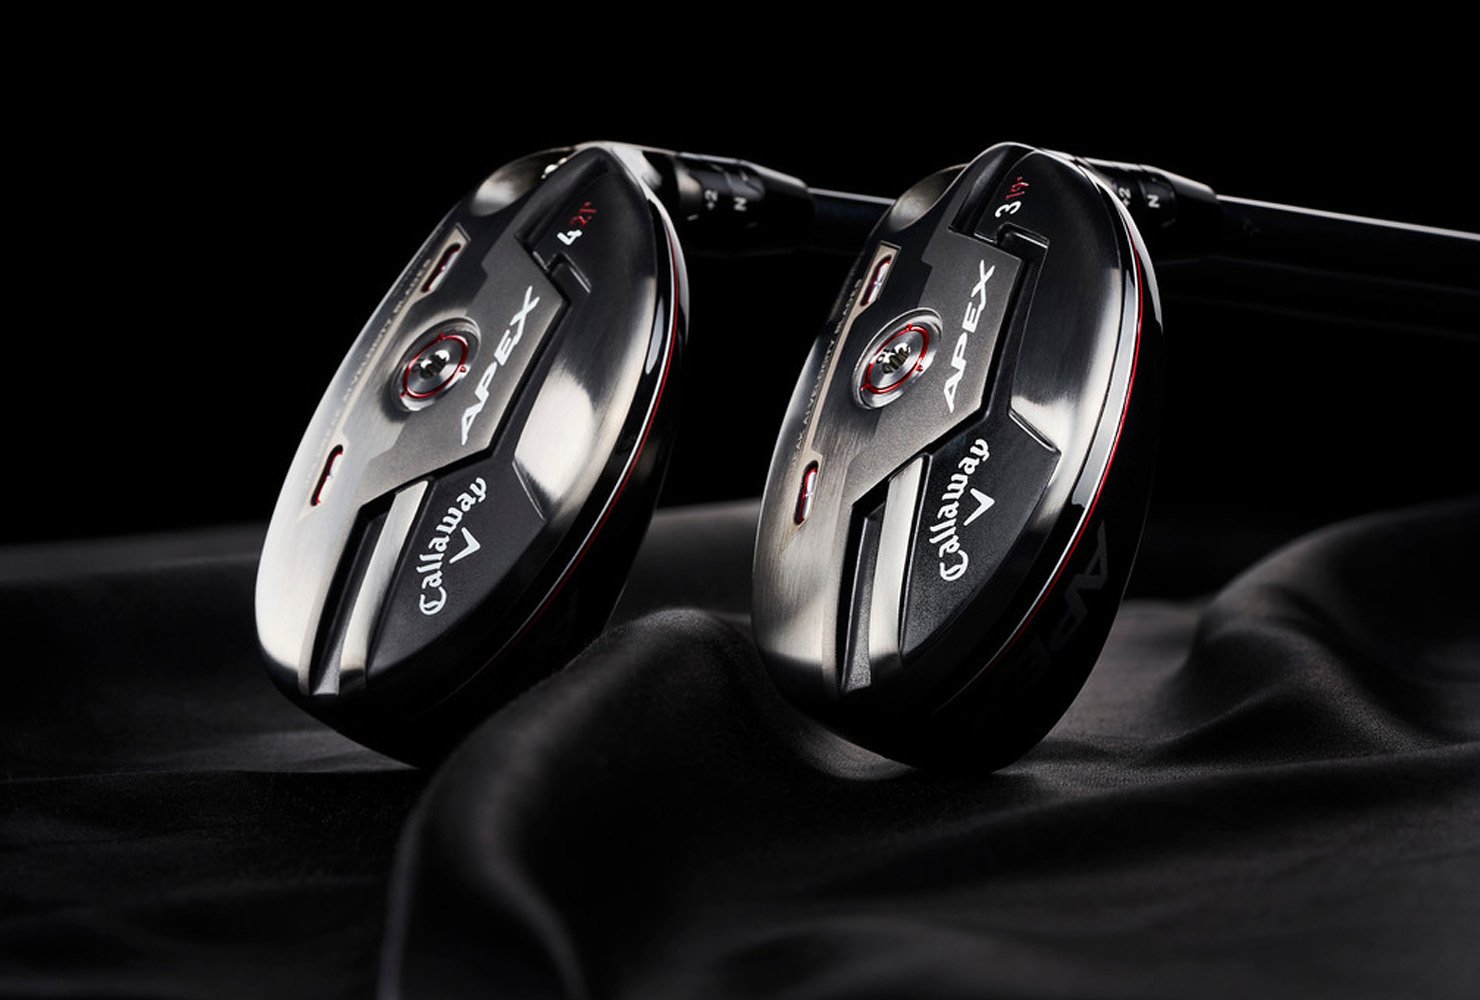 First Look Callaway Apex 21 Hybrids The Hackers Paradise